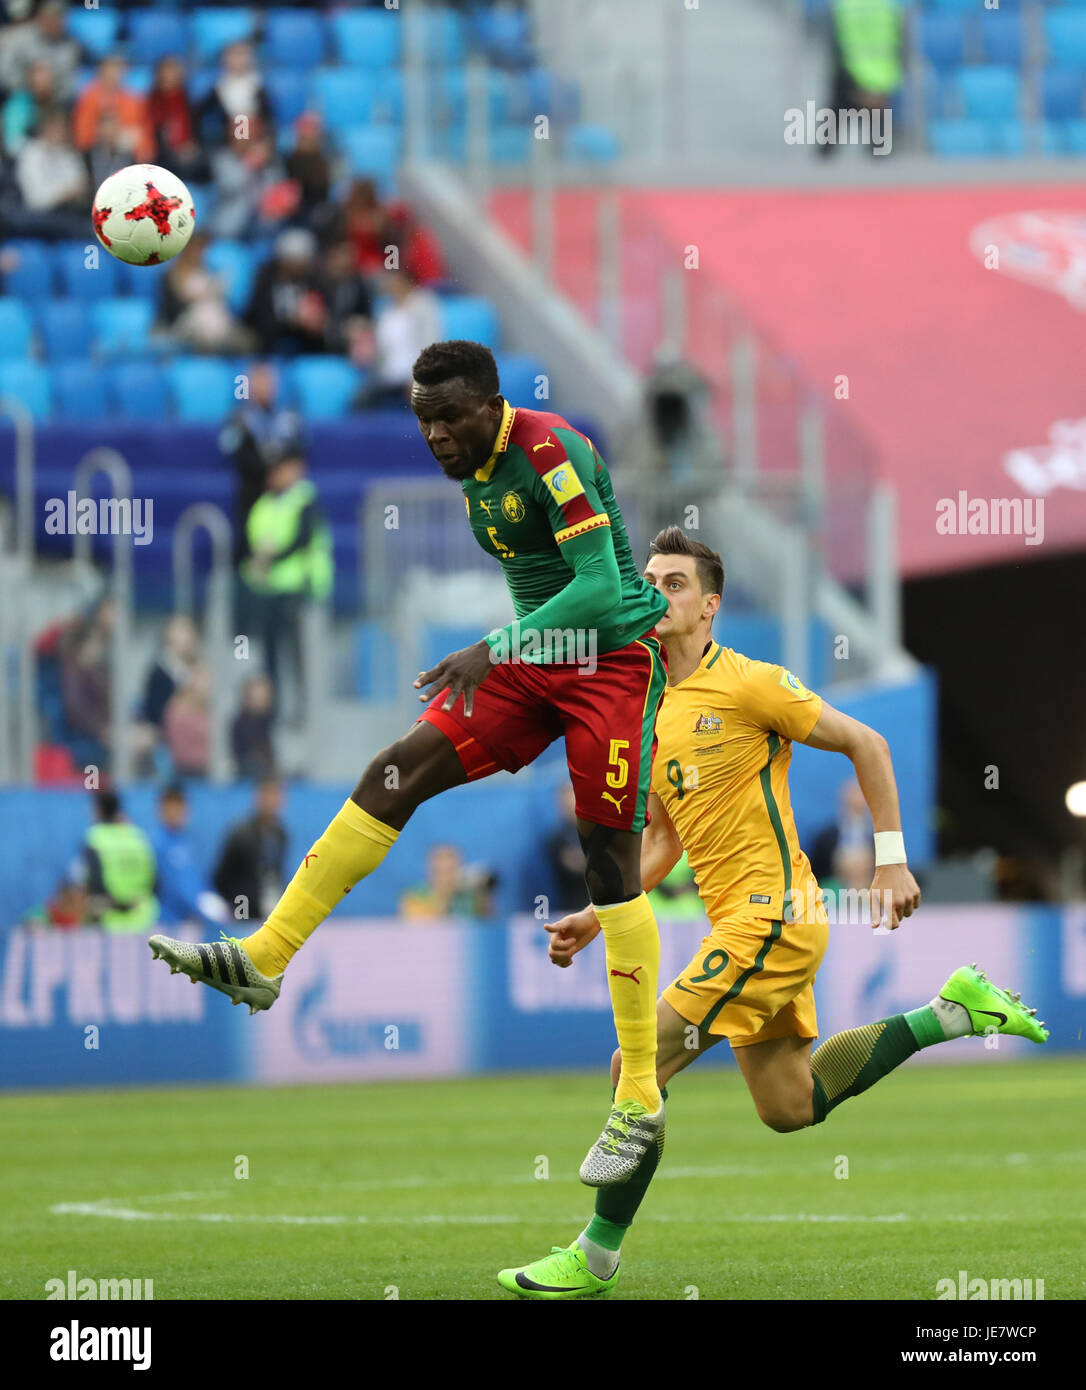 St. Petersburg, Russia. 22nd June, 2017. Michael Ngadeu-Ngadjui (L) of Cameroon vies with Tomi Juric of Australia during the group B match between Cameroon and Australia at the 2017 FIFA Confederations Cup in St. Petersburg, Russia, on June 22, 2017. The match ended with a 1-1 draw. Credit: Xu Zijian/Xinhua/Alamy Live News Stock Photo